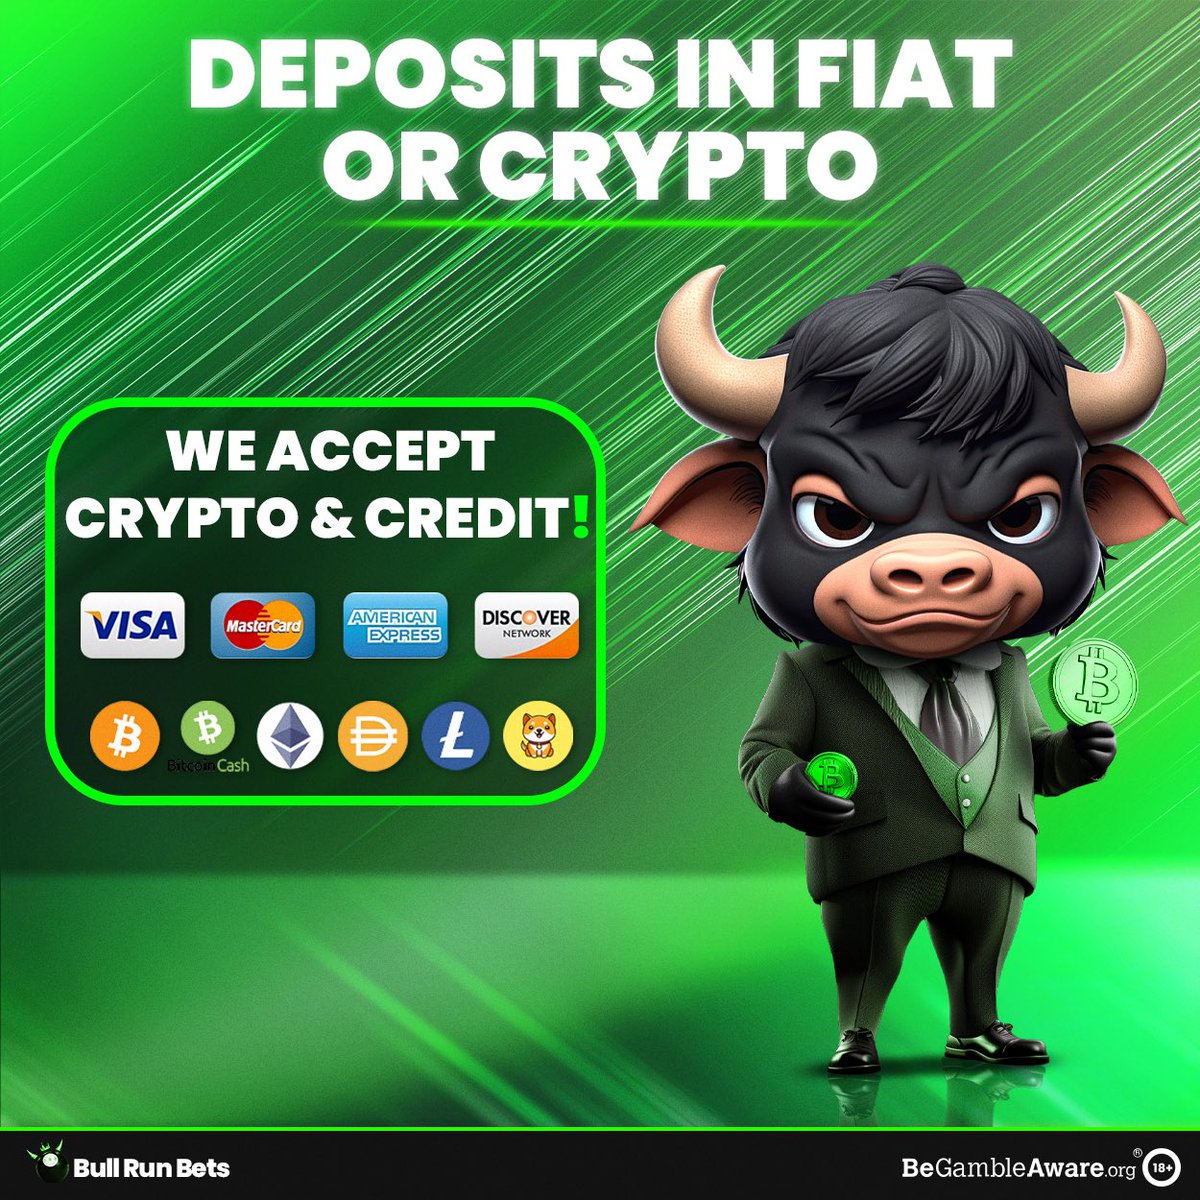 💳💰 Exciting news! Bull Run Bets now accepts both fiat and crypto payments, including Visa and Mastercard! 

🚀 Whether you prefer traditional currency or cutting-edge cryptocurrencies, we've got you covered. 

Join us today and experience seamless transactions! 

#BullRunBets